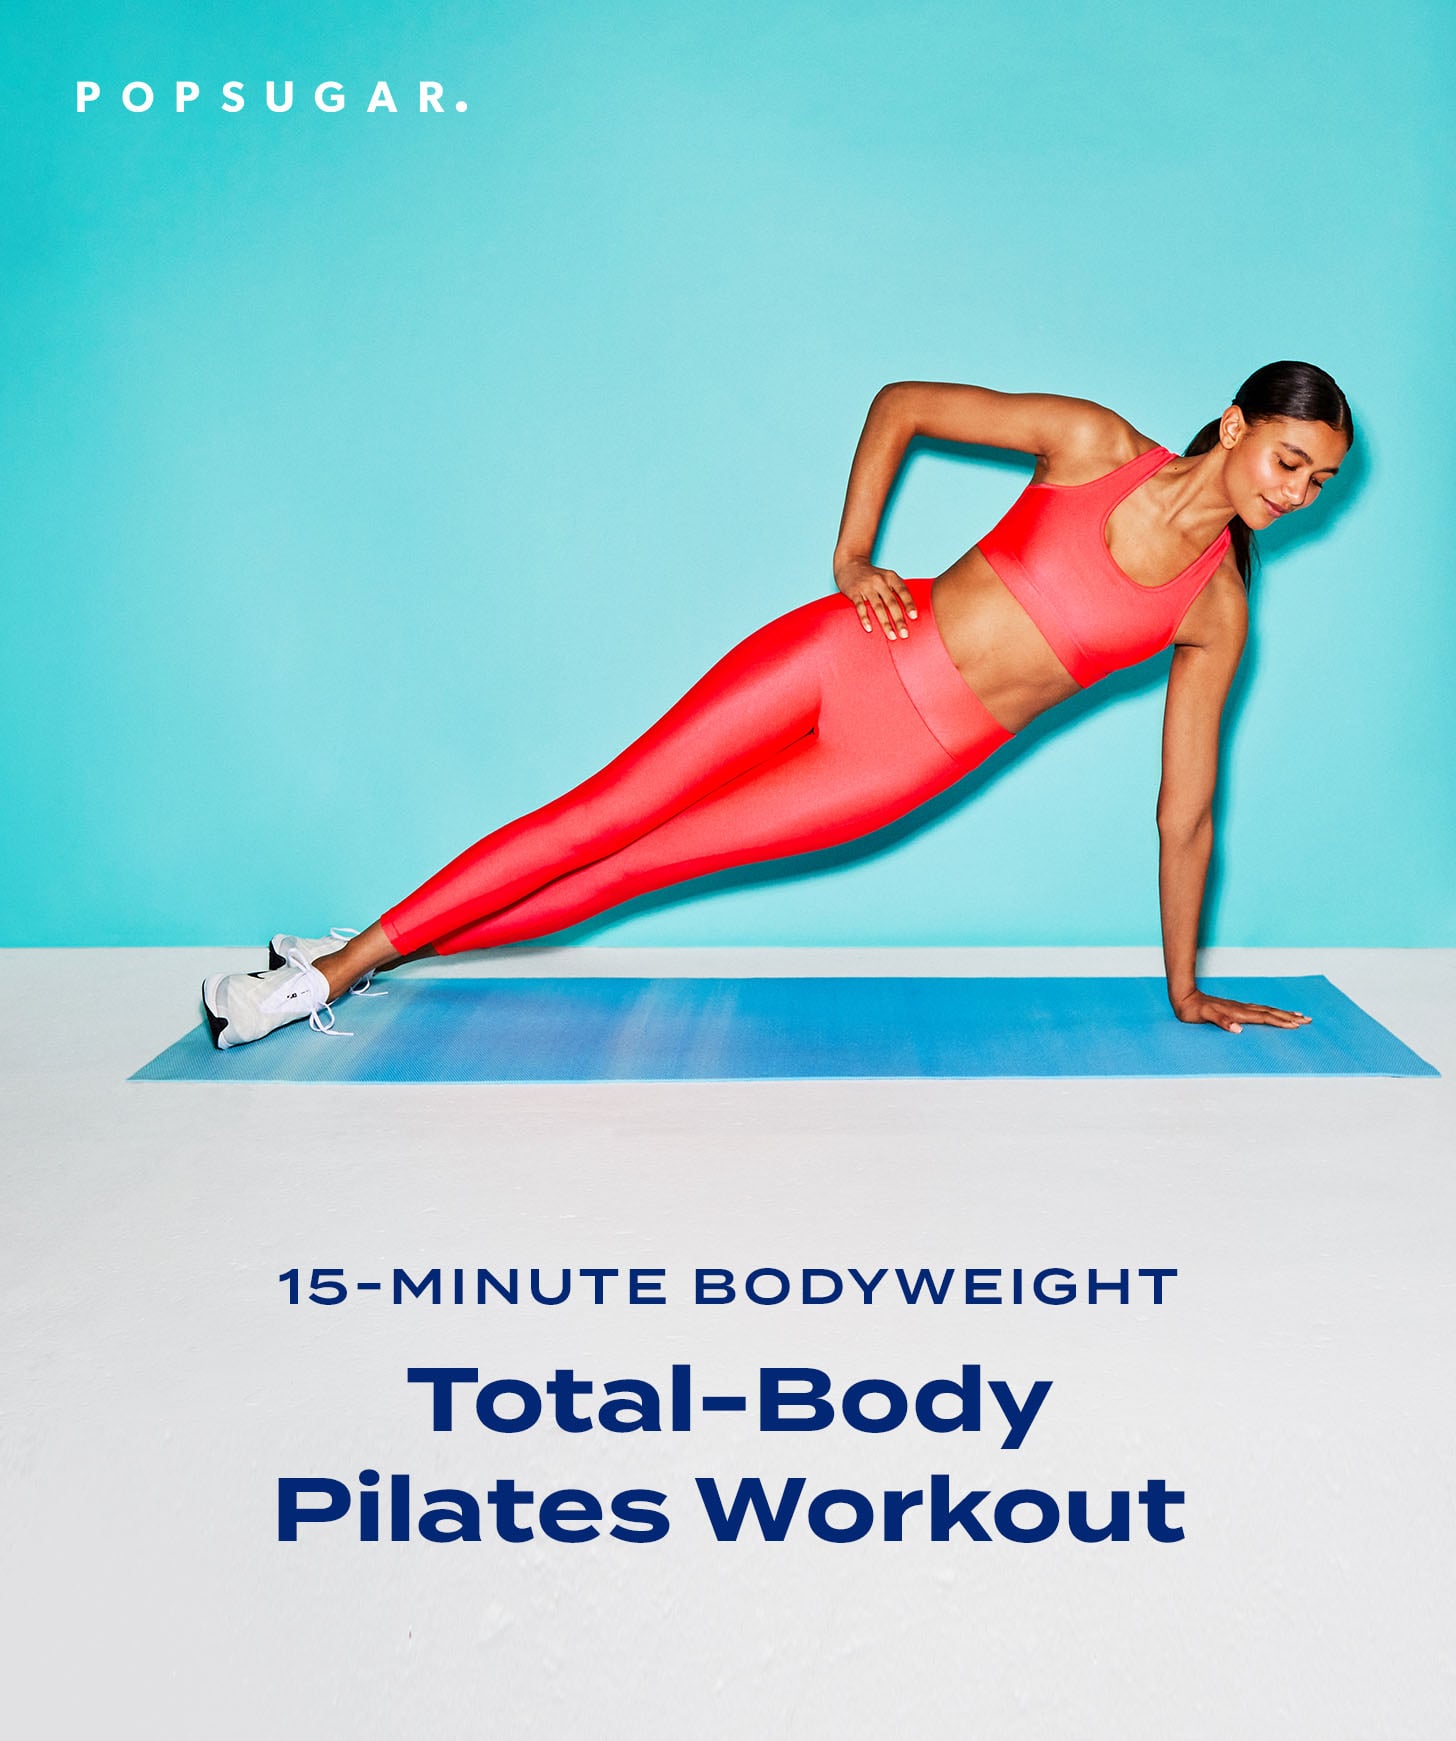 18 Minute Full Body Pilates Workout with Weights